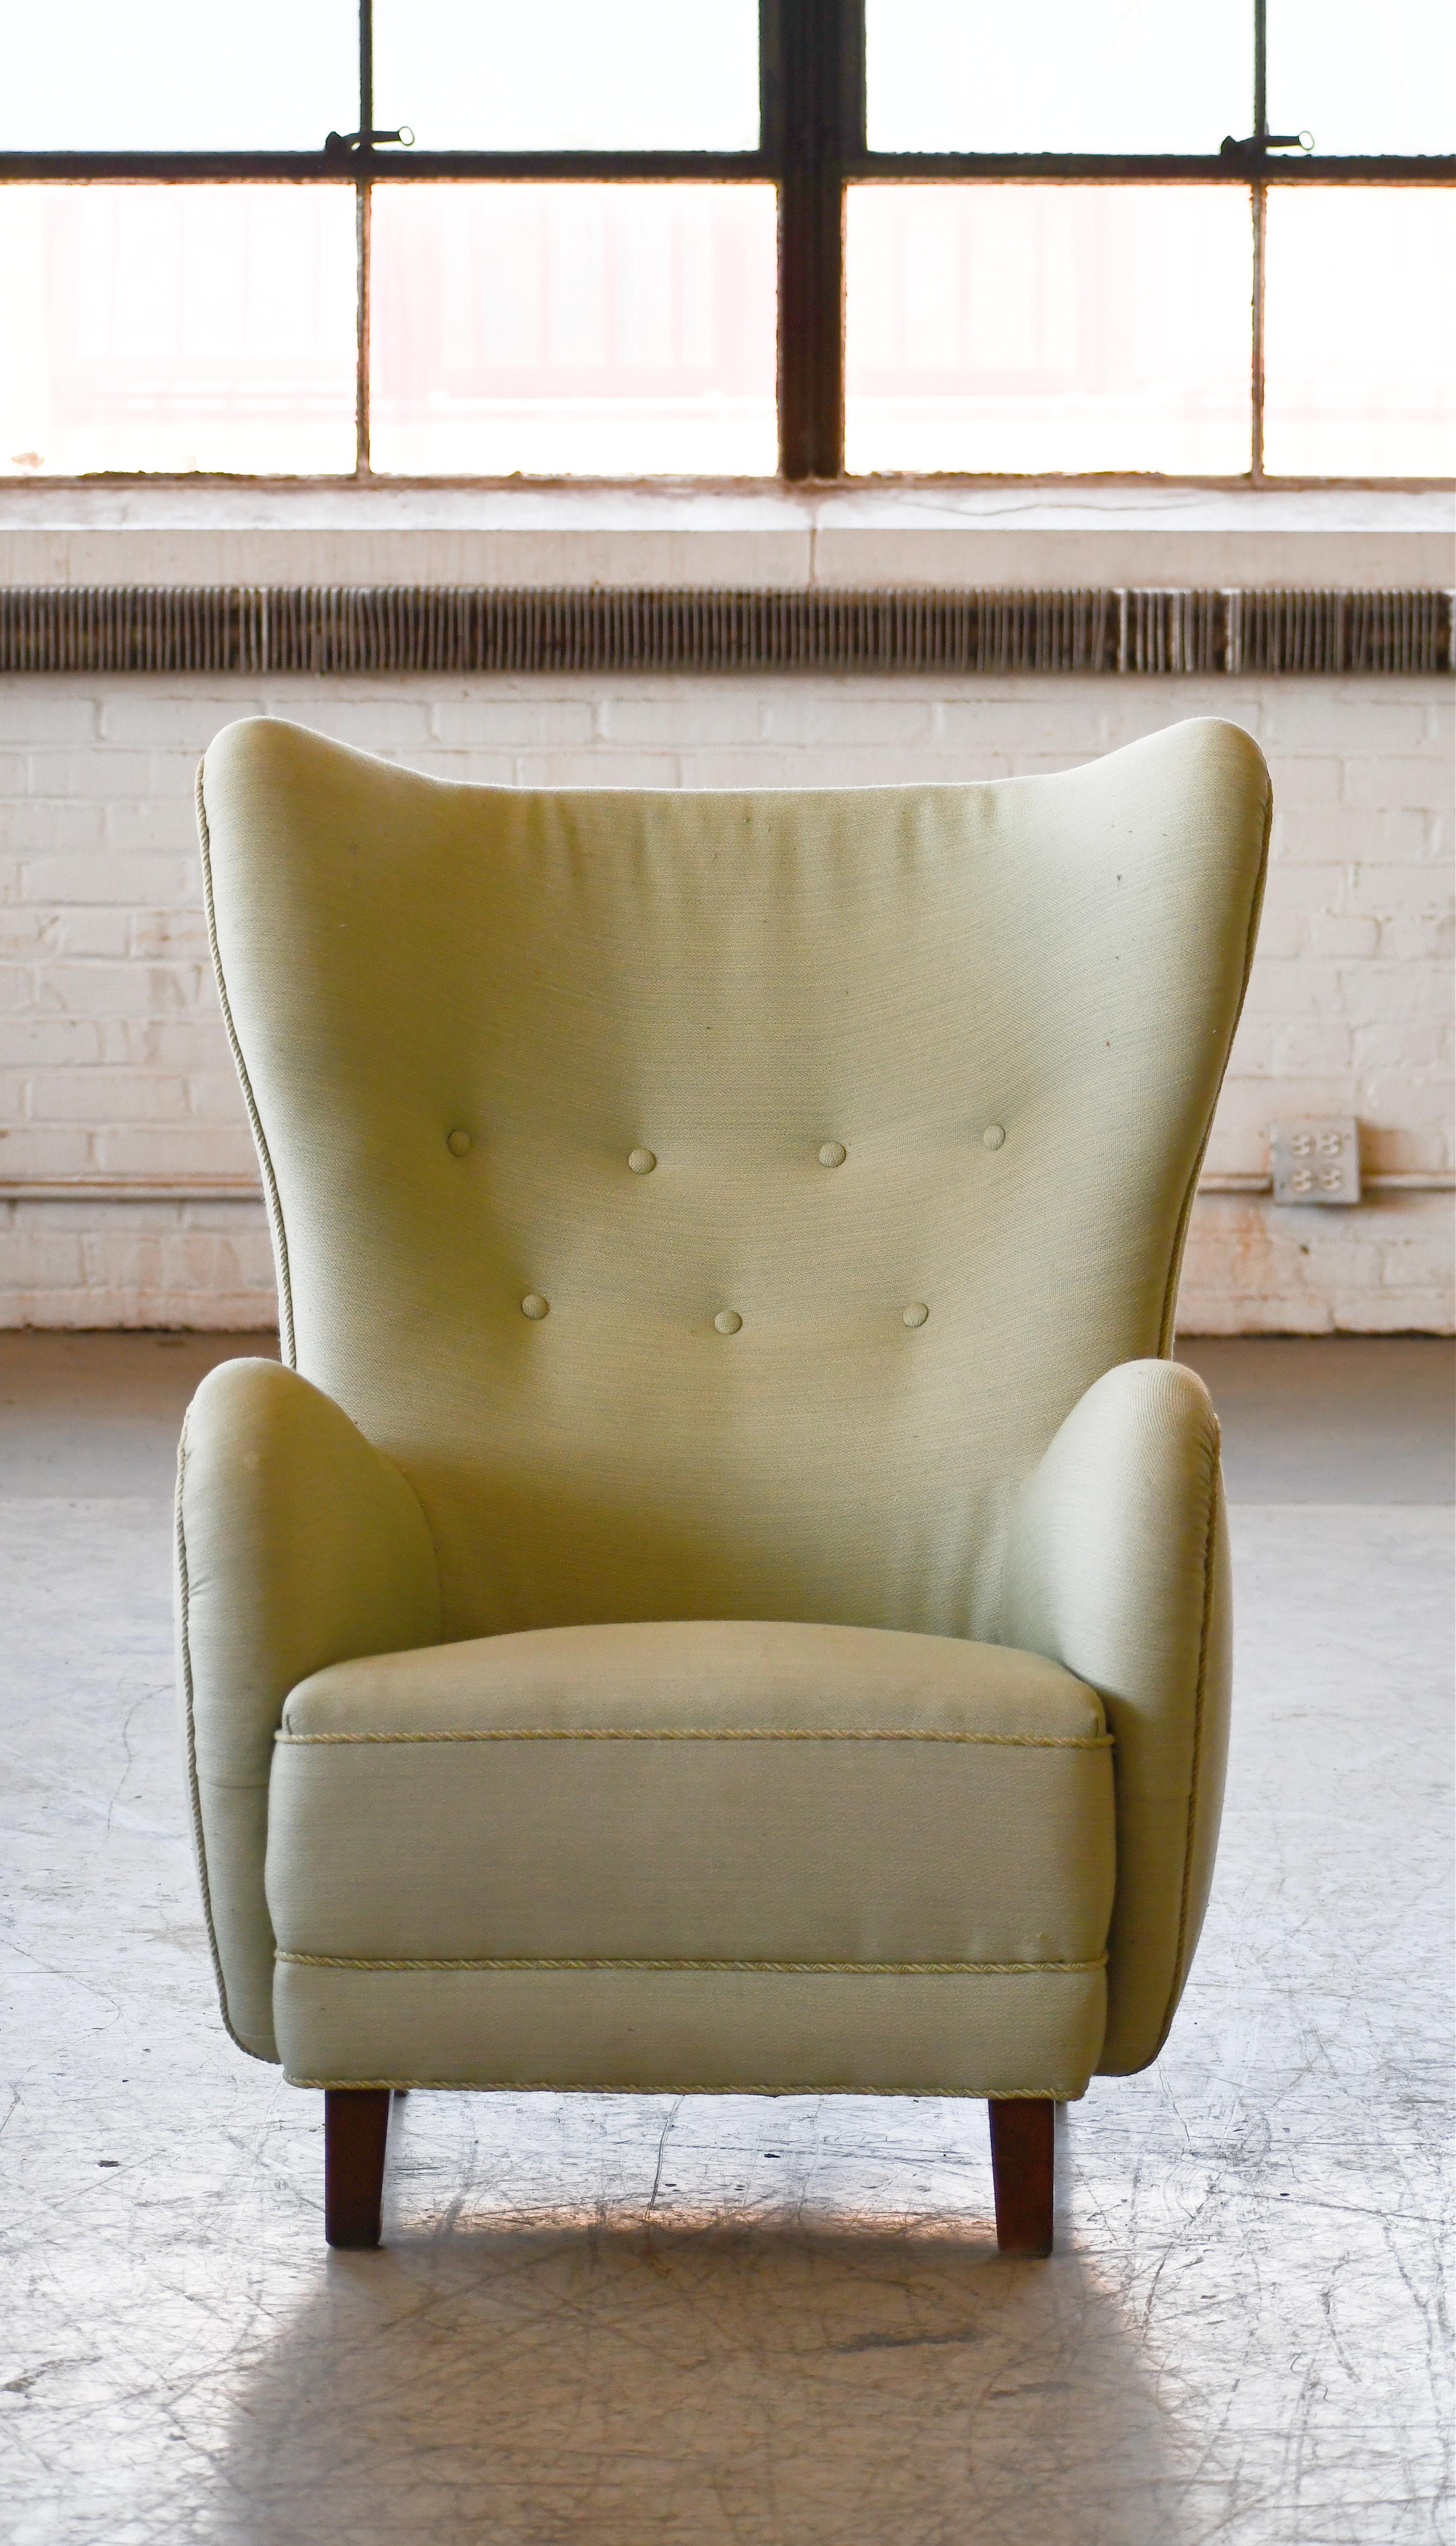 Mid-Century Modern High Back Lounge Chair Attributed to Flemming Lassen Denmark 1940's For Sale